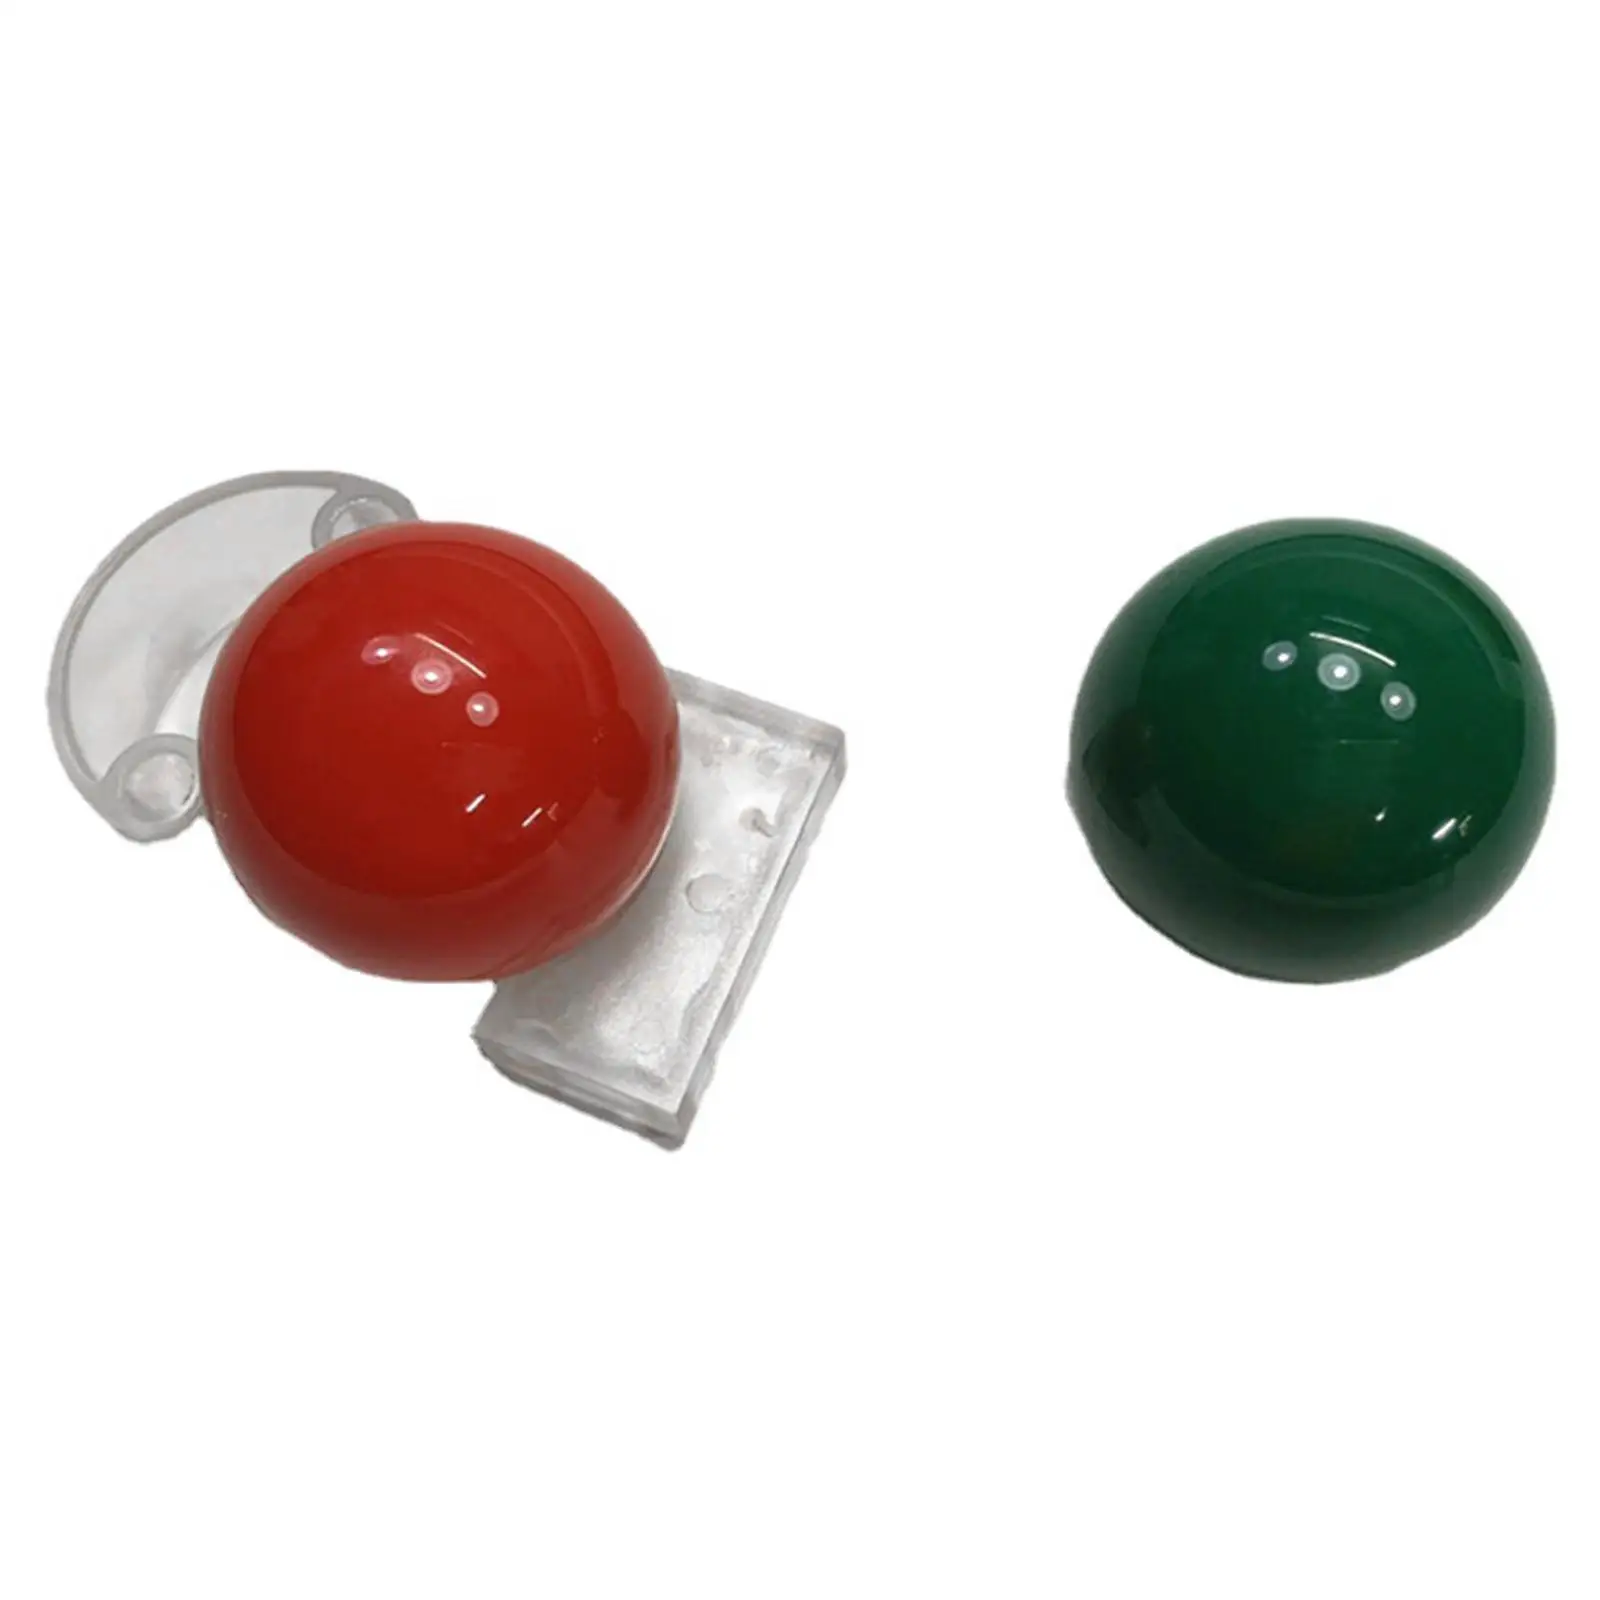 2Pcs Billiards Ball Position Marker Portable Transparent Snooker Ball Holder Pool Table Accessories